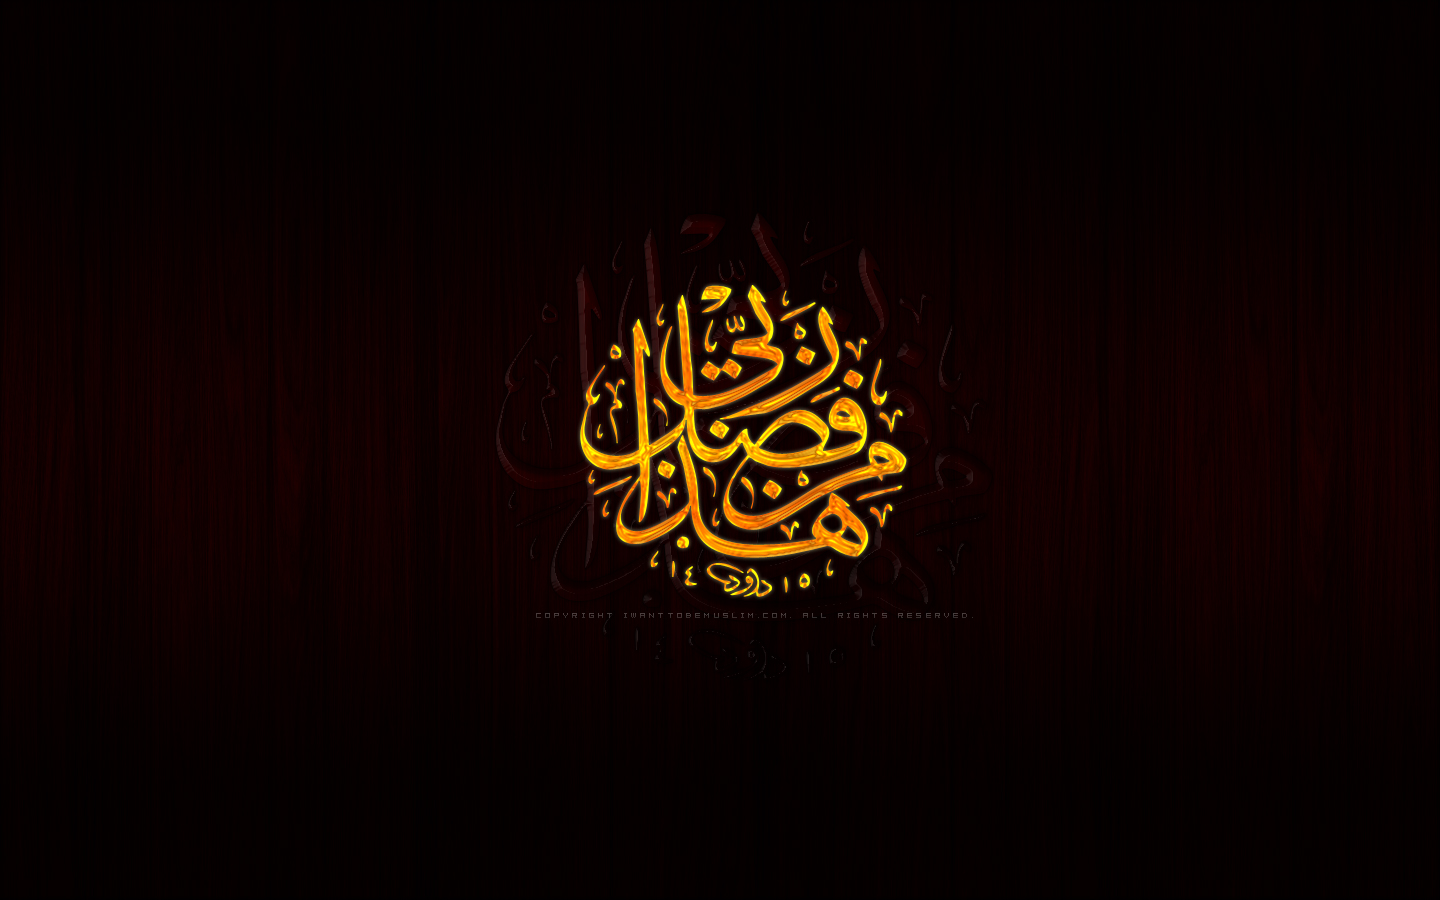 Islamic Wallpaper HD Pictures One Background